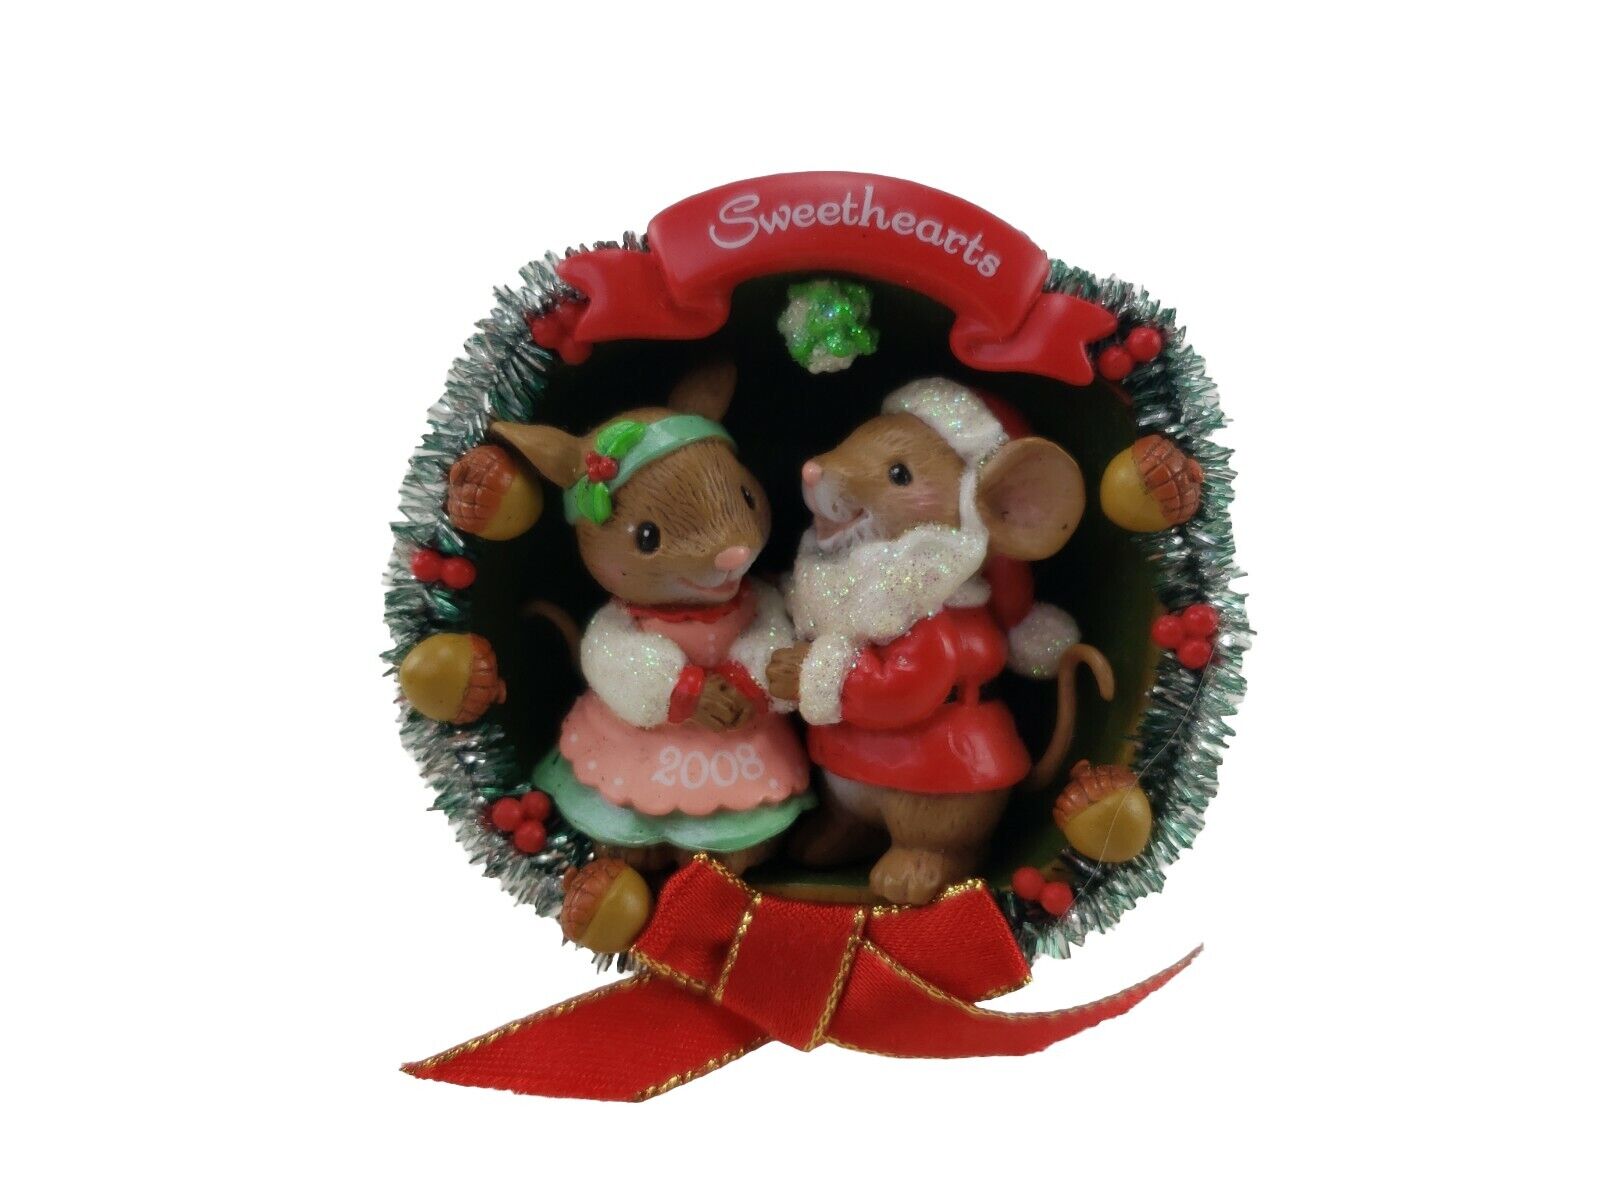 2008 Sweethearts Mouse Mice Wreath Christmas Ornament American Greetings